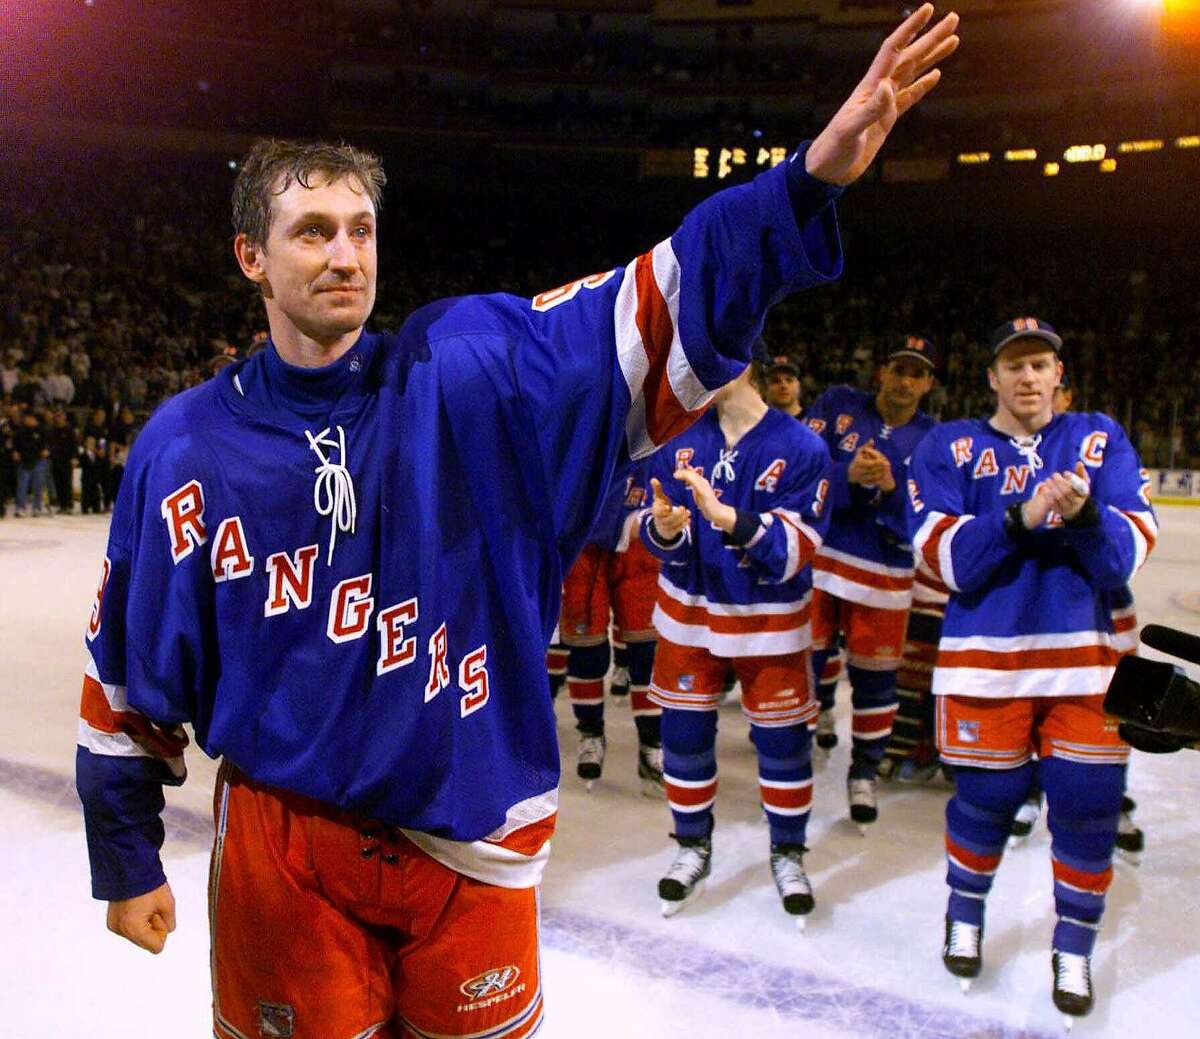 ADVANCE FOR WEEKEND EDITIONS SEPT. 25-26--FILE--New York Rangers' Wayne Gretzky leads his teammates around the ice during ceremonies following his last game in the NHL, April 18, 1999, in New York. The NHL may have a hard time topping the drama of the 1998-99 season, when Gretzky retired after a spectacular career and the Dallas Stars won a thrilling and controversial Stanley Cup series over the Buffalo Sabres. (AP Photo/Paul Chiasson)